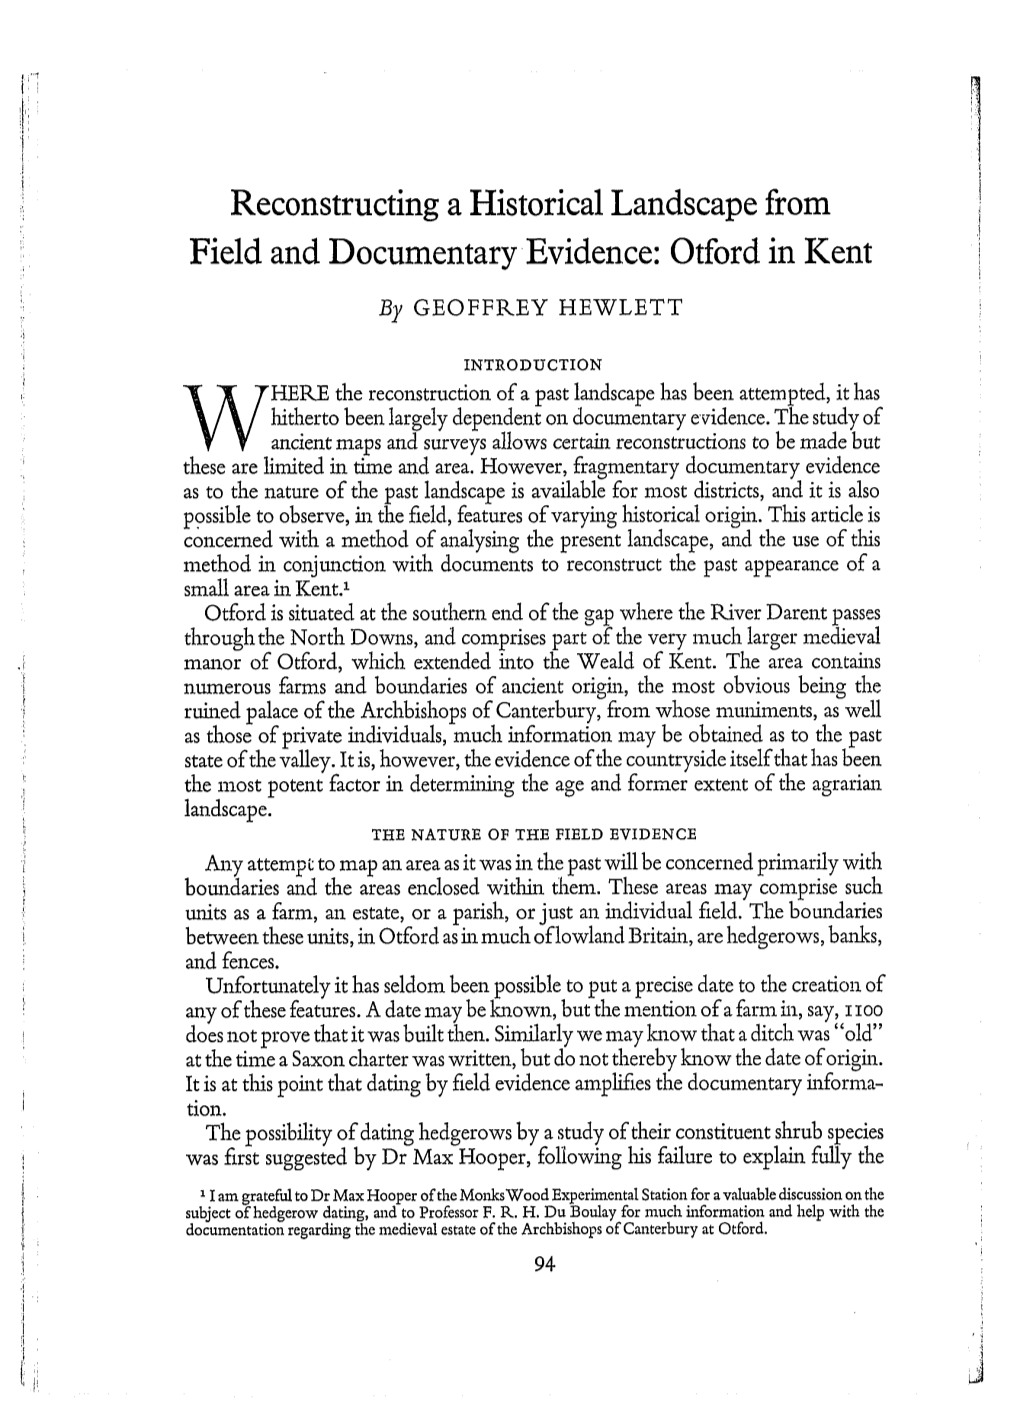 Reconstructing a Historical Landscape from Field and Documentaryevidence: Otford in Kent